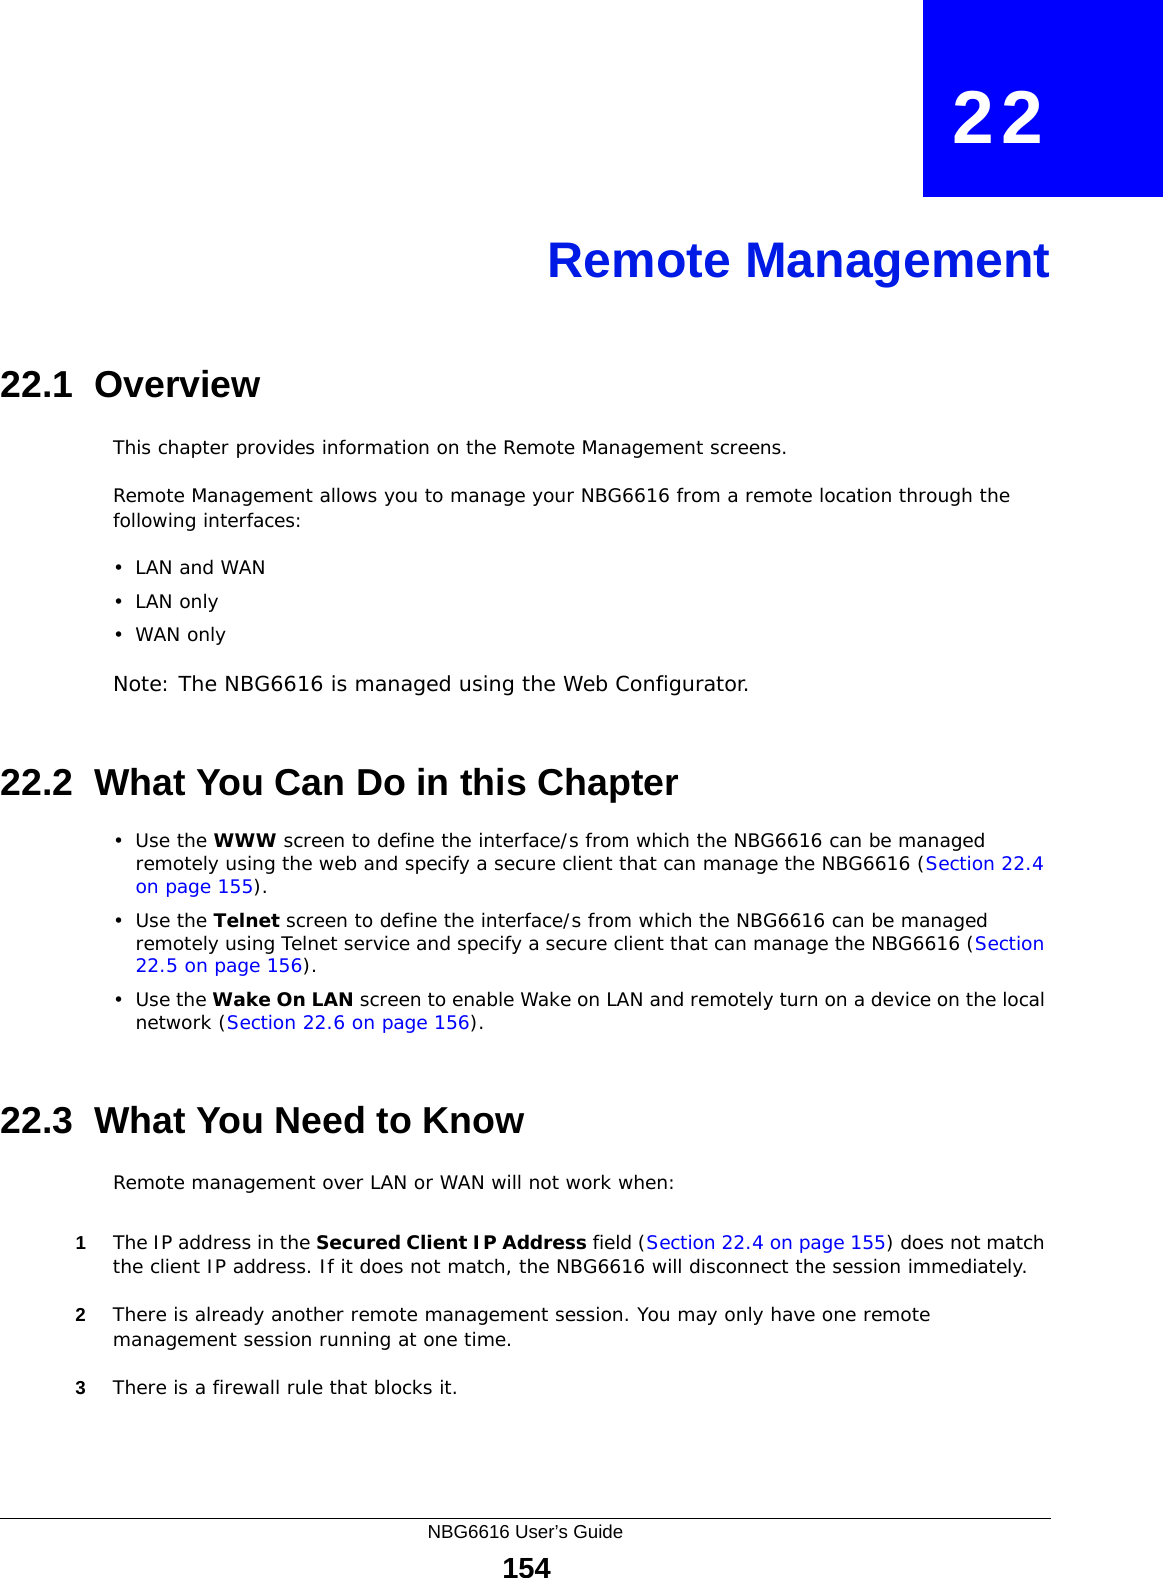 NBG6616 User’s Guide154CHAPTER   22Remote Management22.1  OverviewThis chapter provides information on the Remote Management screens. Remote Management allows you to manage your NBG6616 from a remote location through the following interfaces:•LAN and WAN•LAN only•WAN onlyNote: The NBG6616 is managed using the Web Configurator.22.2  What You Can Do in this Chapter•Use the WWW screen to define the interface/s from which the NBG6616 can be managed remotely using the web and specify a secure client that can manage the NBG6616 (Section 22.4 on page 155).•Use the Telnet screen to define the interface/s from which the NBG6616 can be managed remotely using Telnet service and specify a secure client that can manage the NBG6616 (Section 22.5 on page 156).•Use the Wake On LAN screen to enable Wake on LAN and remotely turn on a device on the local network (Section 22.6 on page 156).22.3  What You Need to KnowRemote management over LAN or WAN will not work when:1The IP address in the Secured Client IP Address field (Section 22.4 on page 155) does not match the client IP address. If it does not match, the NBG6616 will disconnect the session immediately.2There is already another remote management session. You may only have one remote management session running at one time.3There is a firewall rule that blocks it.